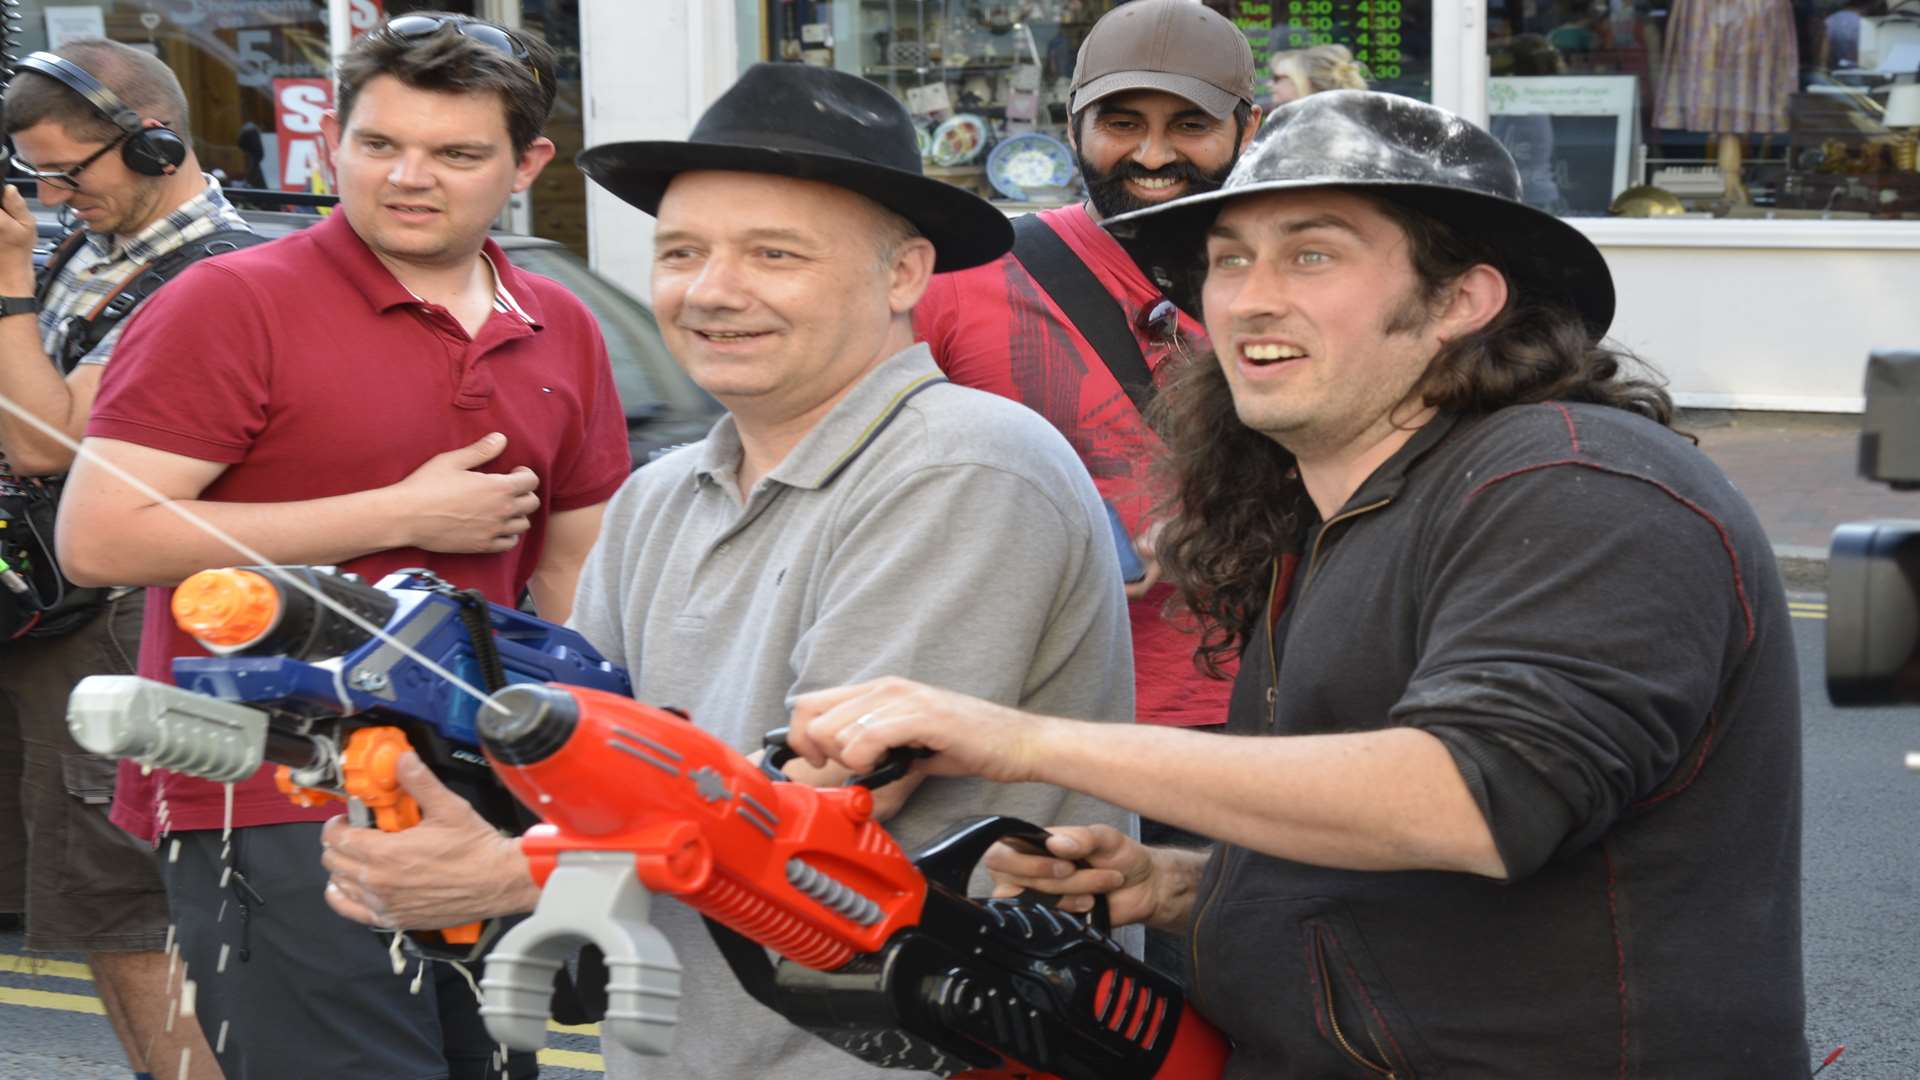 Bob Mortimer and fellow comedian Ross Noble armed with custard-loaded water pistols at the Black Dog Cafe in Tunbridge Wells in 2013. Picture: Martin Apps